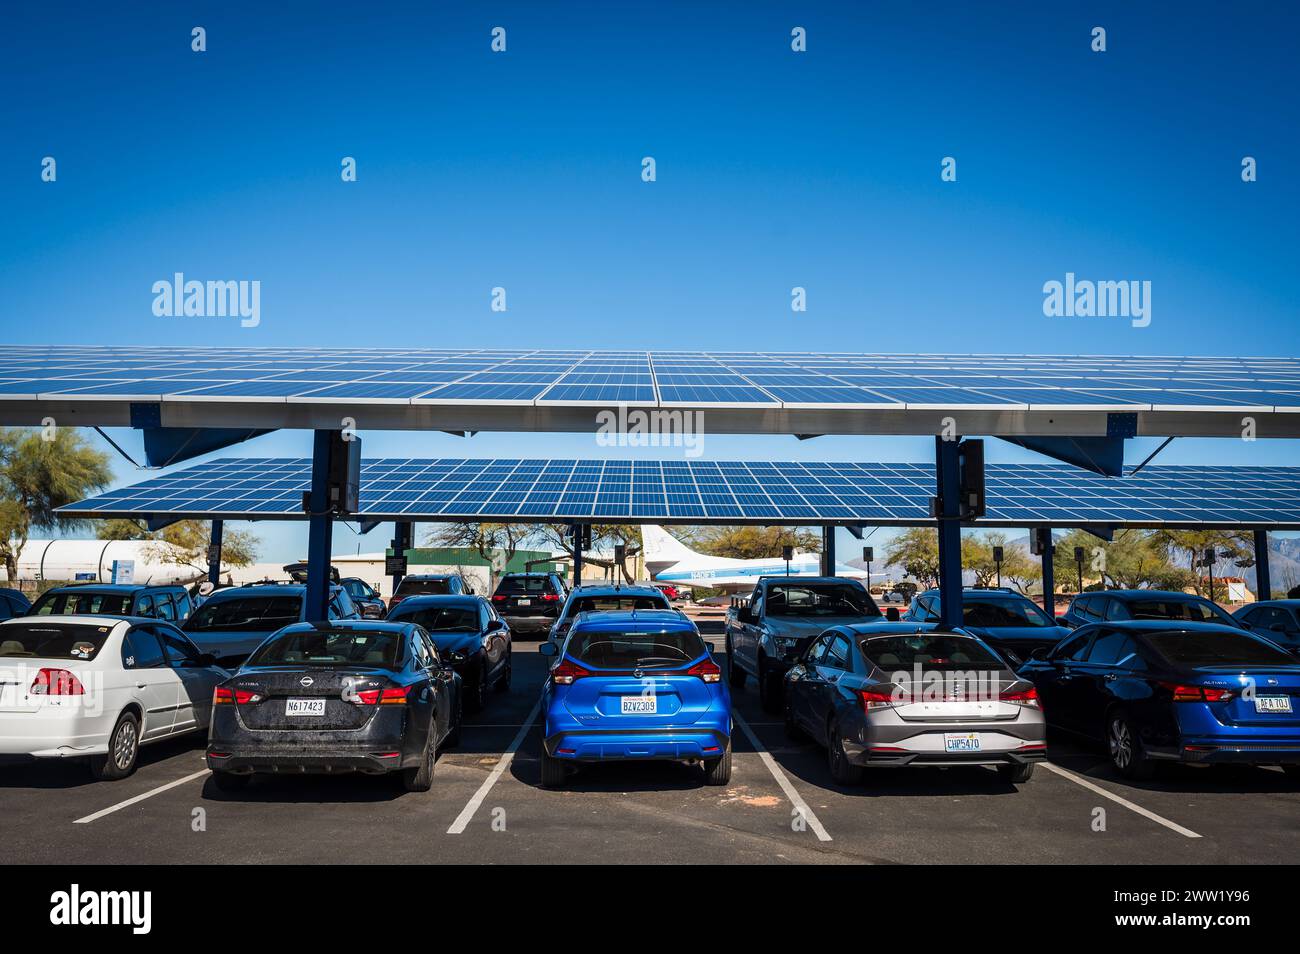 Pima Air and Space Museum.  Solar panel parking lot shelters. Tucson Arizona. Stock Photo